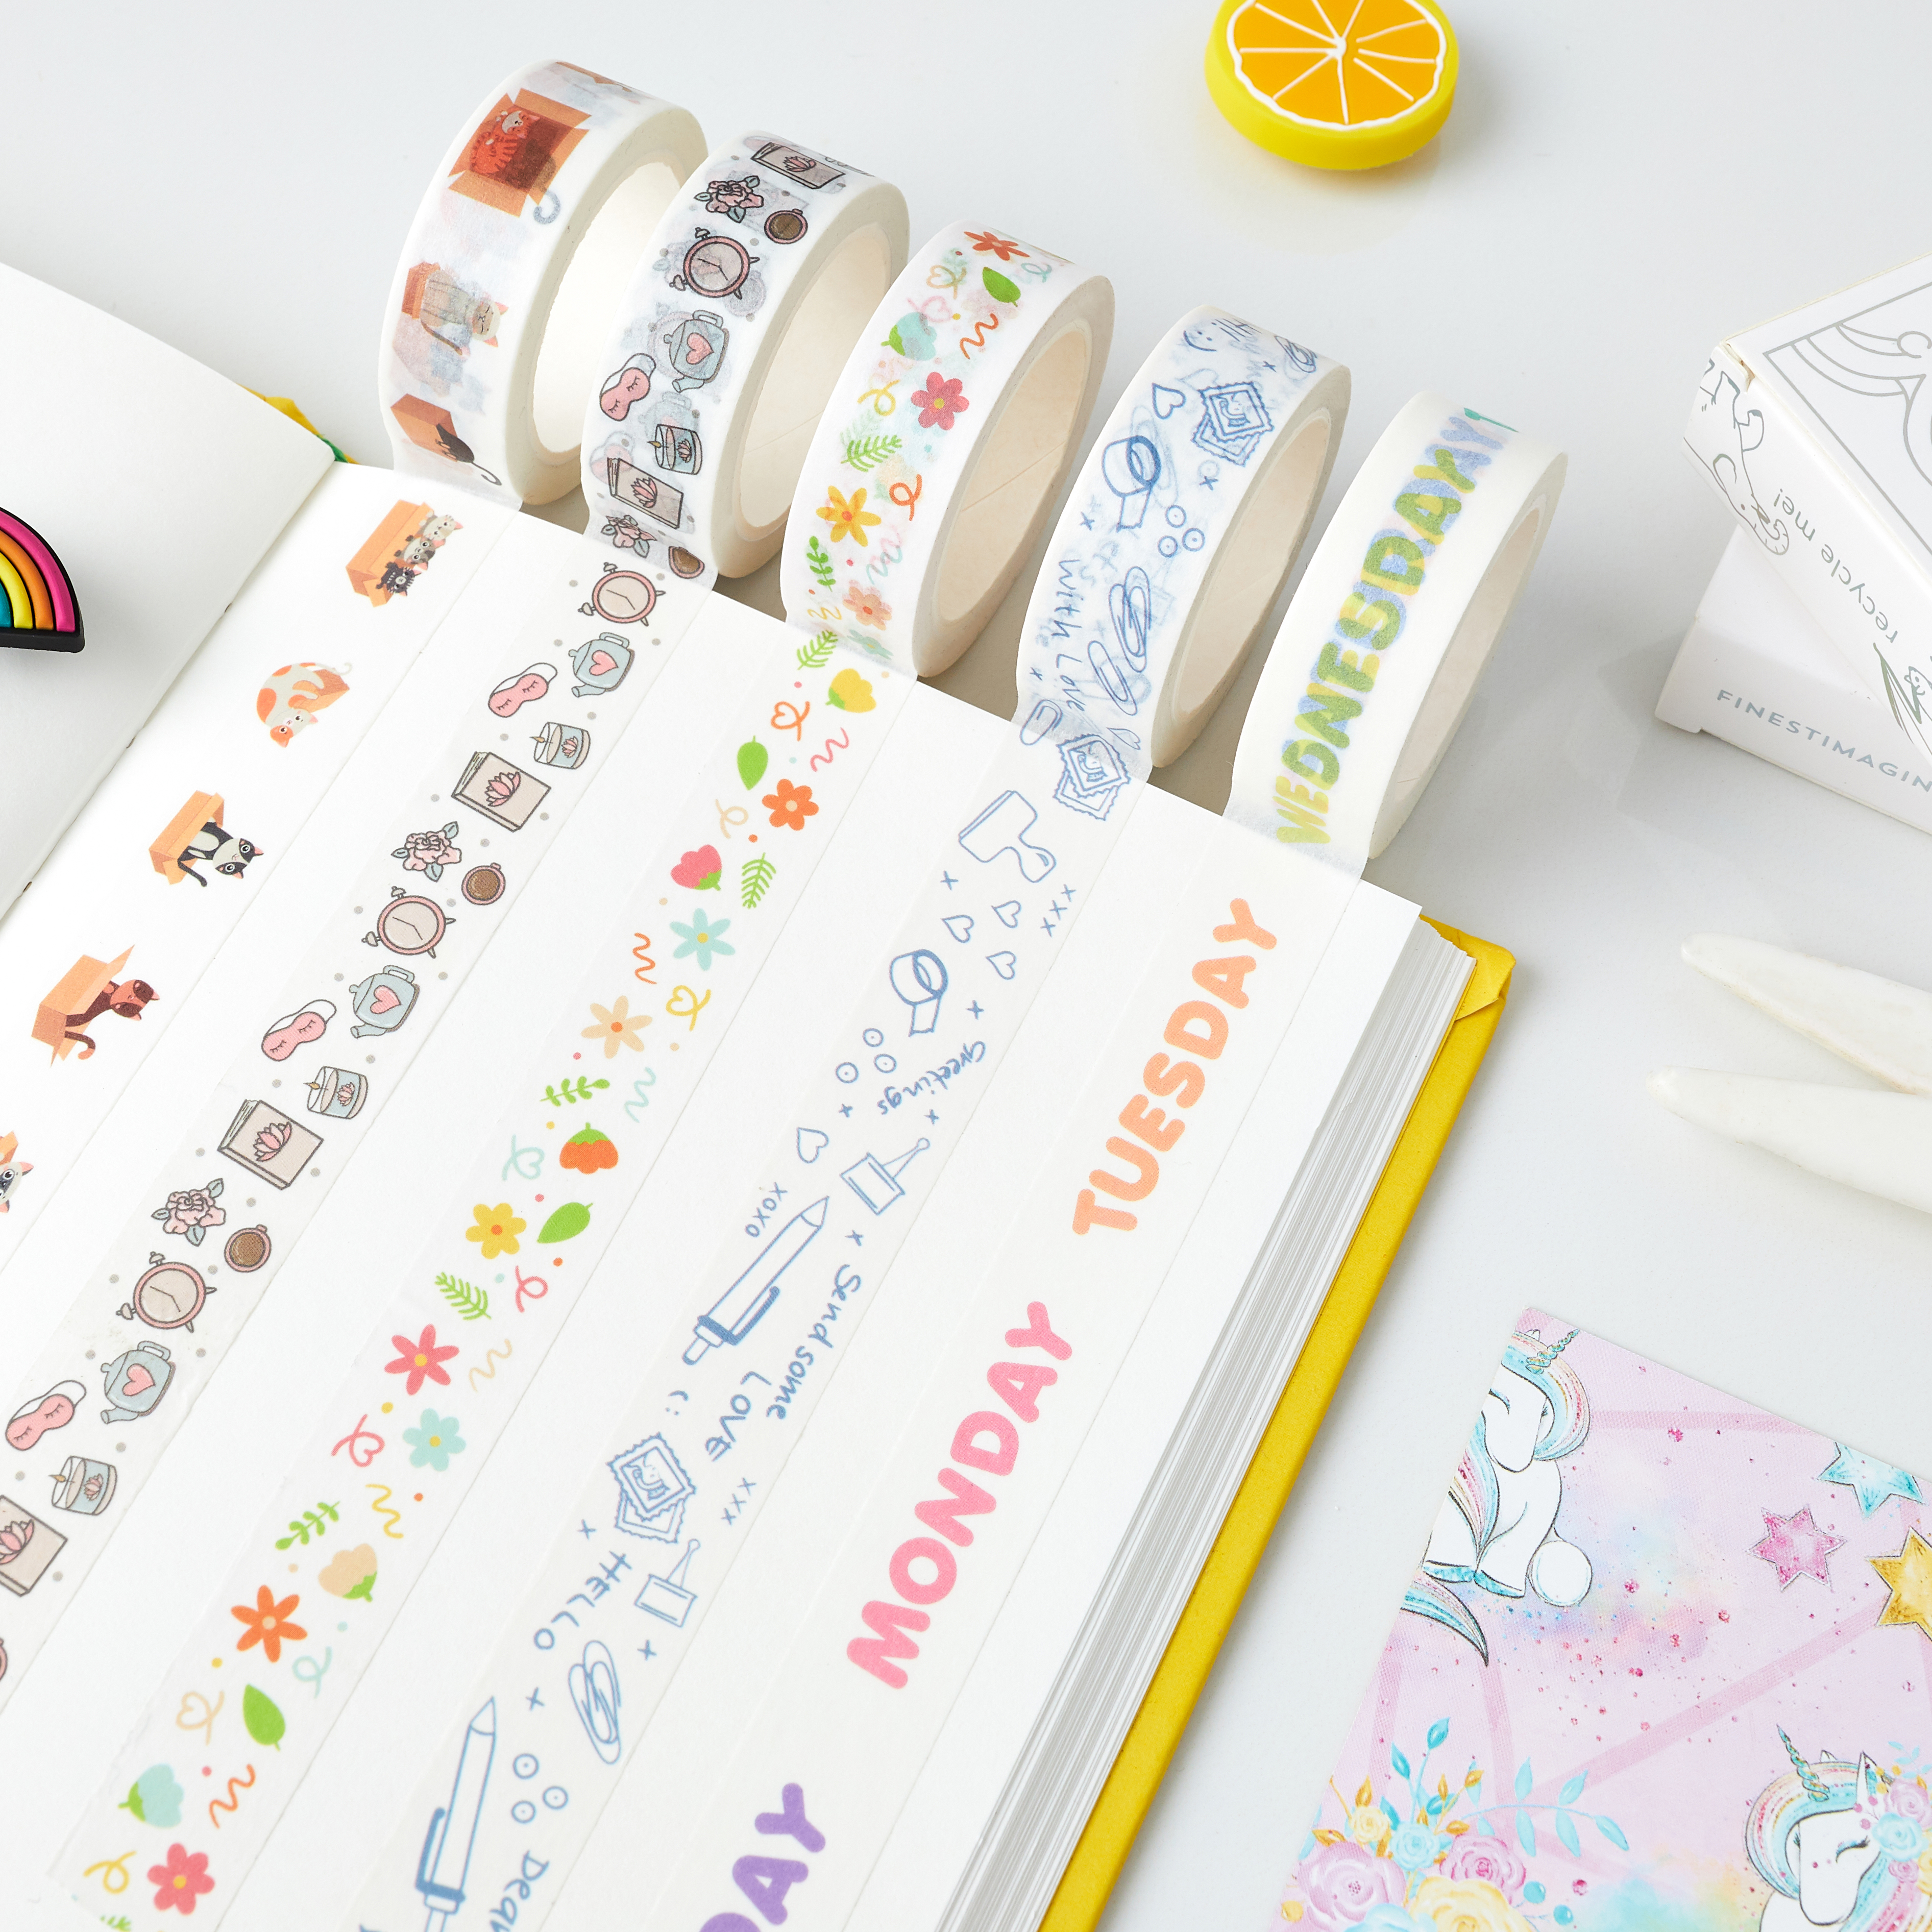 Printed Washi Tape Manufacturer With Low Moq-50 Rolls